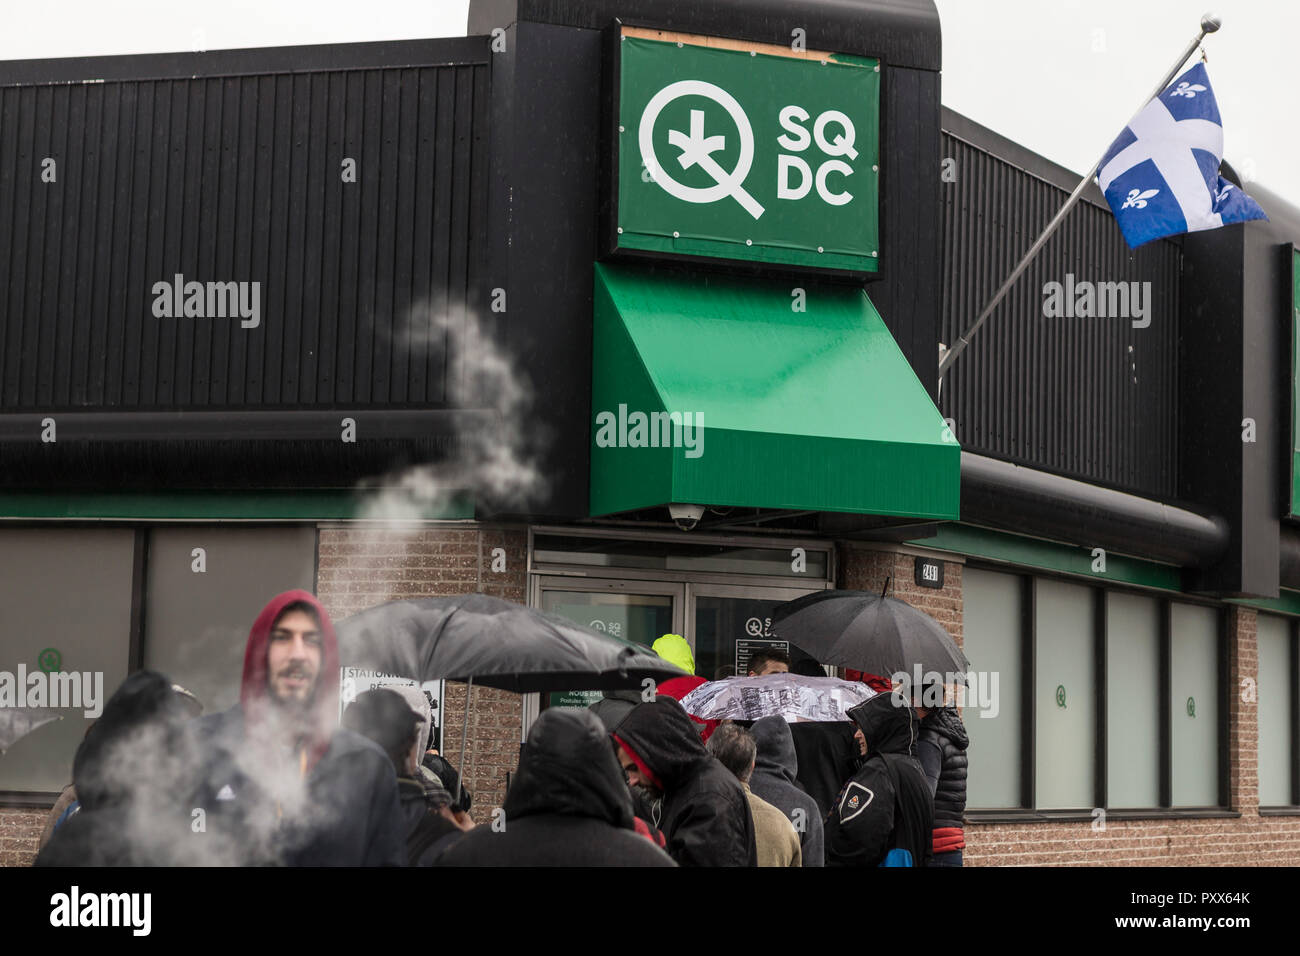 A line of customers formed on the first day of cannabis legalization at a SQDC (Societe quebecoise du cannabis) store in Quebec city, Canada, 17 October 2018. Stock Photo